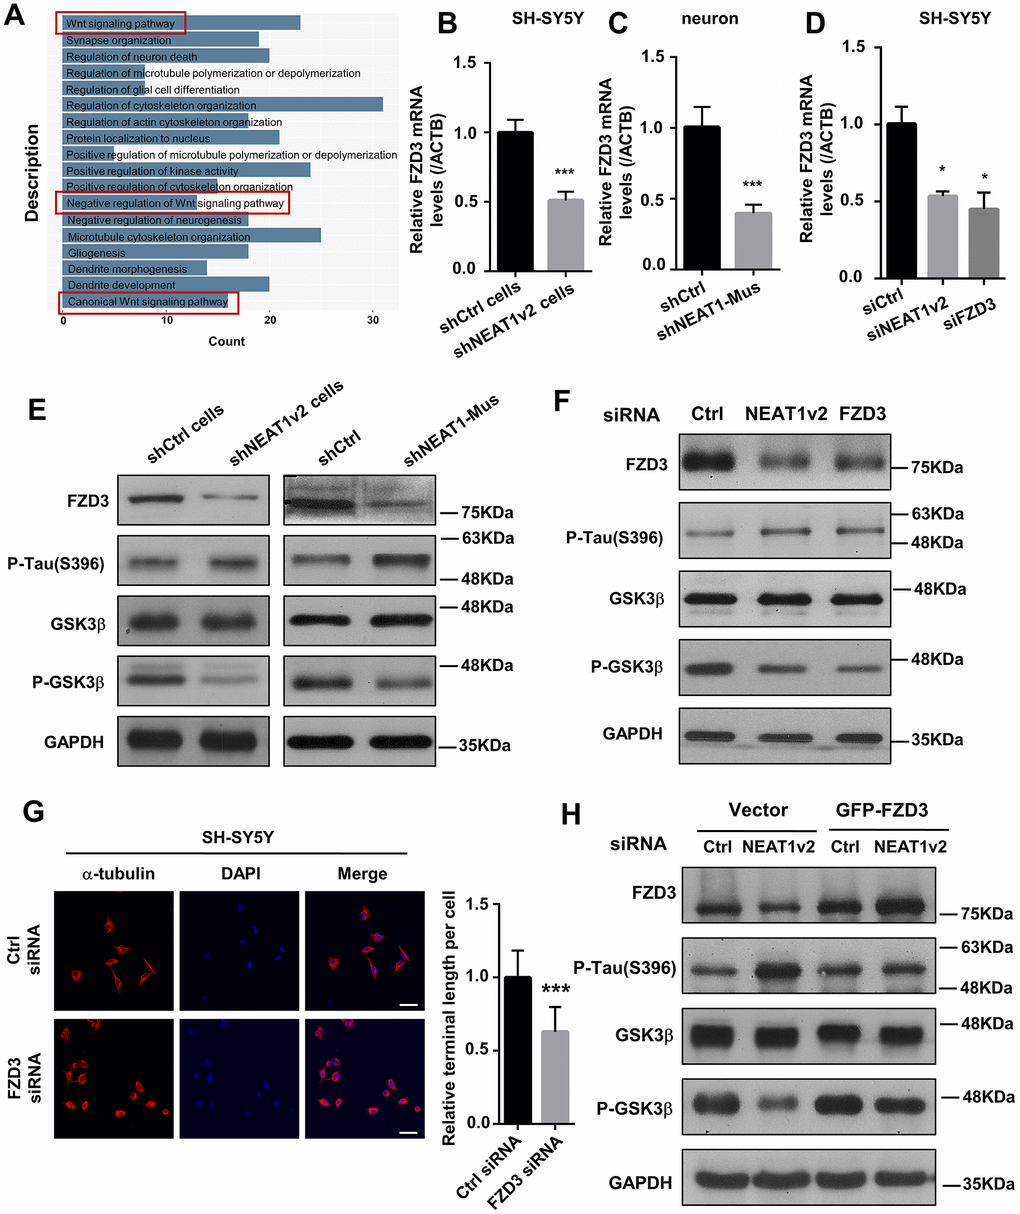 NEAT1 silencing mediates de-polymerization of MTs via FZD3/GSK3β/p-tau signaling pathway. (A) GO analyses were performed using the NEAT1-associated genes obtained from expression profile of braak stage 1/2 AD patients in GSE84422. (B) The FZD3 mRNA level was measured by quantitative PCR in shNEAT1v2 cells and shCtrl cells. (C) The mRNA level of FZD3 in shNEAT1-Mus and shCtrl transfected murine neurons. (D) The mRNA level of FZD3 in SH-SY5Y after being transfected with NEAT1 siRNA, FZD3 siRNA and Ctrl siRNA. (E) The expression levels of the FZD3, GSK3β, p-GSK3β, p-Tau(s396), Ace-tubulin and GAPDH were analyzed with immunoblotting in shNEAT1v2 cells, shCtrl cells and shNEAT1-Mus, shCtrl transfected murine neurons, respectively. (F) The expression levels of the FZD3, GSK3β, p-GSK3β, p-Tau(s396), Ace-tubulin and GAPDH were analyzed with immunoblotting in NEAT1v2 siRNA, FZD3 siRNA transiently transfected SH-SY5Y. (G) Immunofluorescence staining of α-tubulin (red) in FZD3 siRNA transiently transfected SH-SY5Y. DAPI (blue) was used to stain the nuclei. Scale bars, 20μm. Image J software was used to analyze the cell dendritic length. (H) The expression levels of the FZD3, GSK3β, p-GSK3β, p-Tau(s396) and GAPDH were analyzed with immunoblotting in GFP-FZD3 vector and control vector, while transfected NEAT1 siRNA (mean ± s.d, *P P P t test).